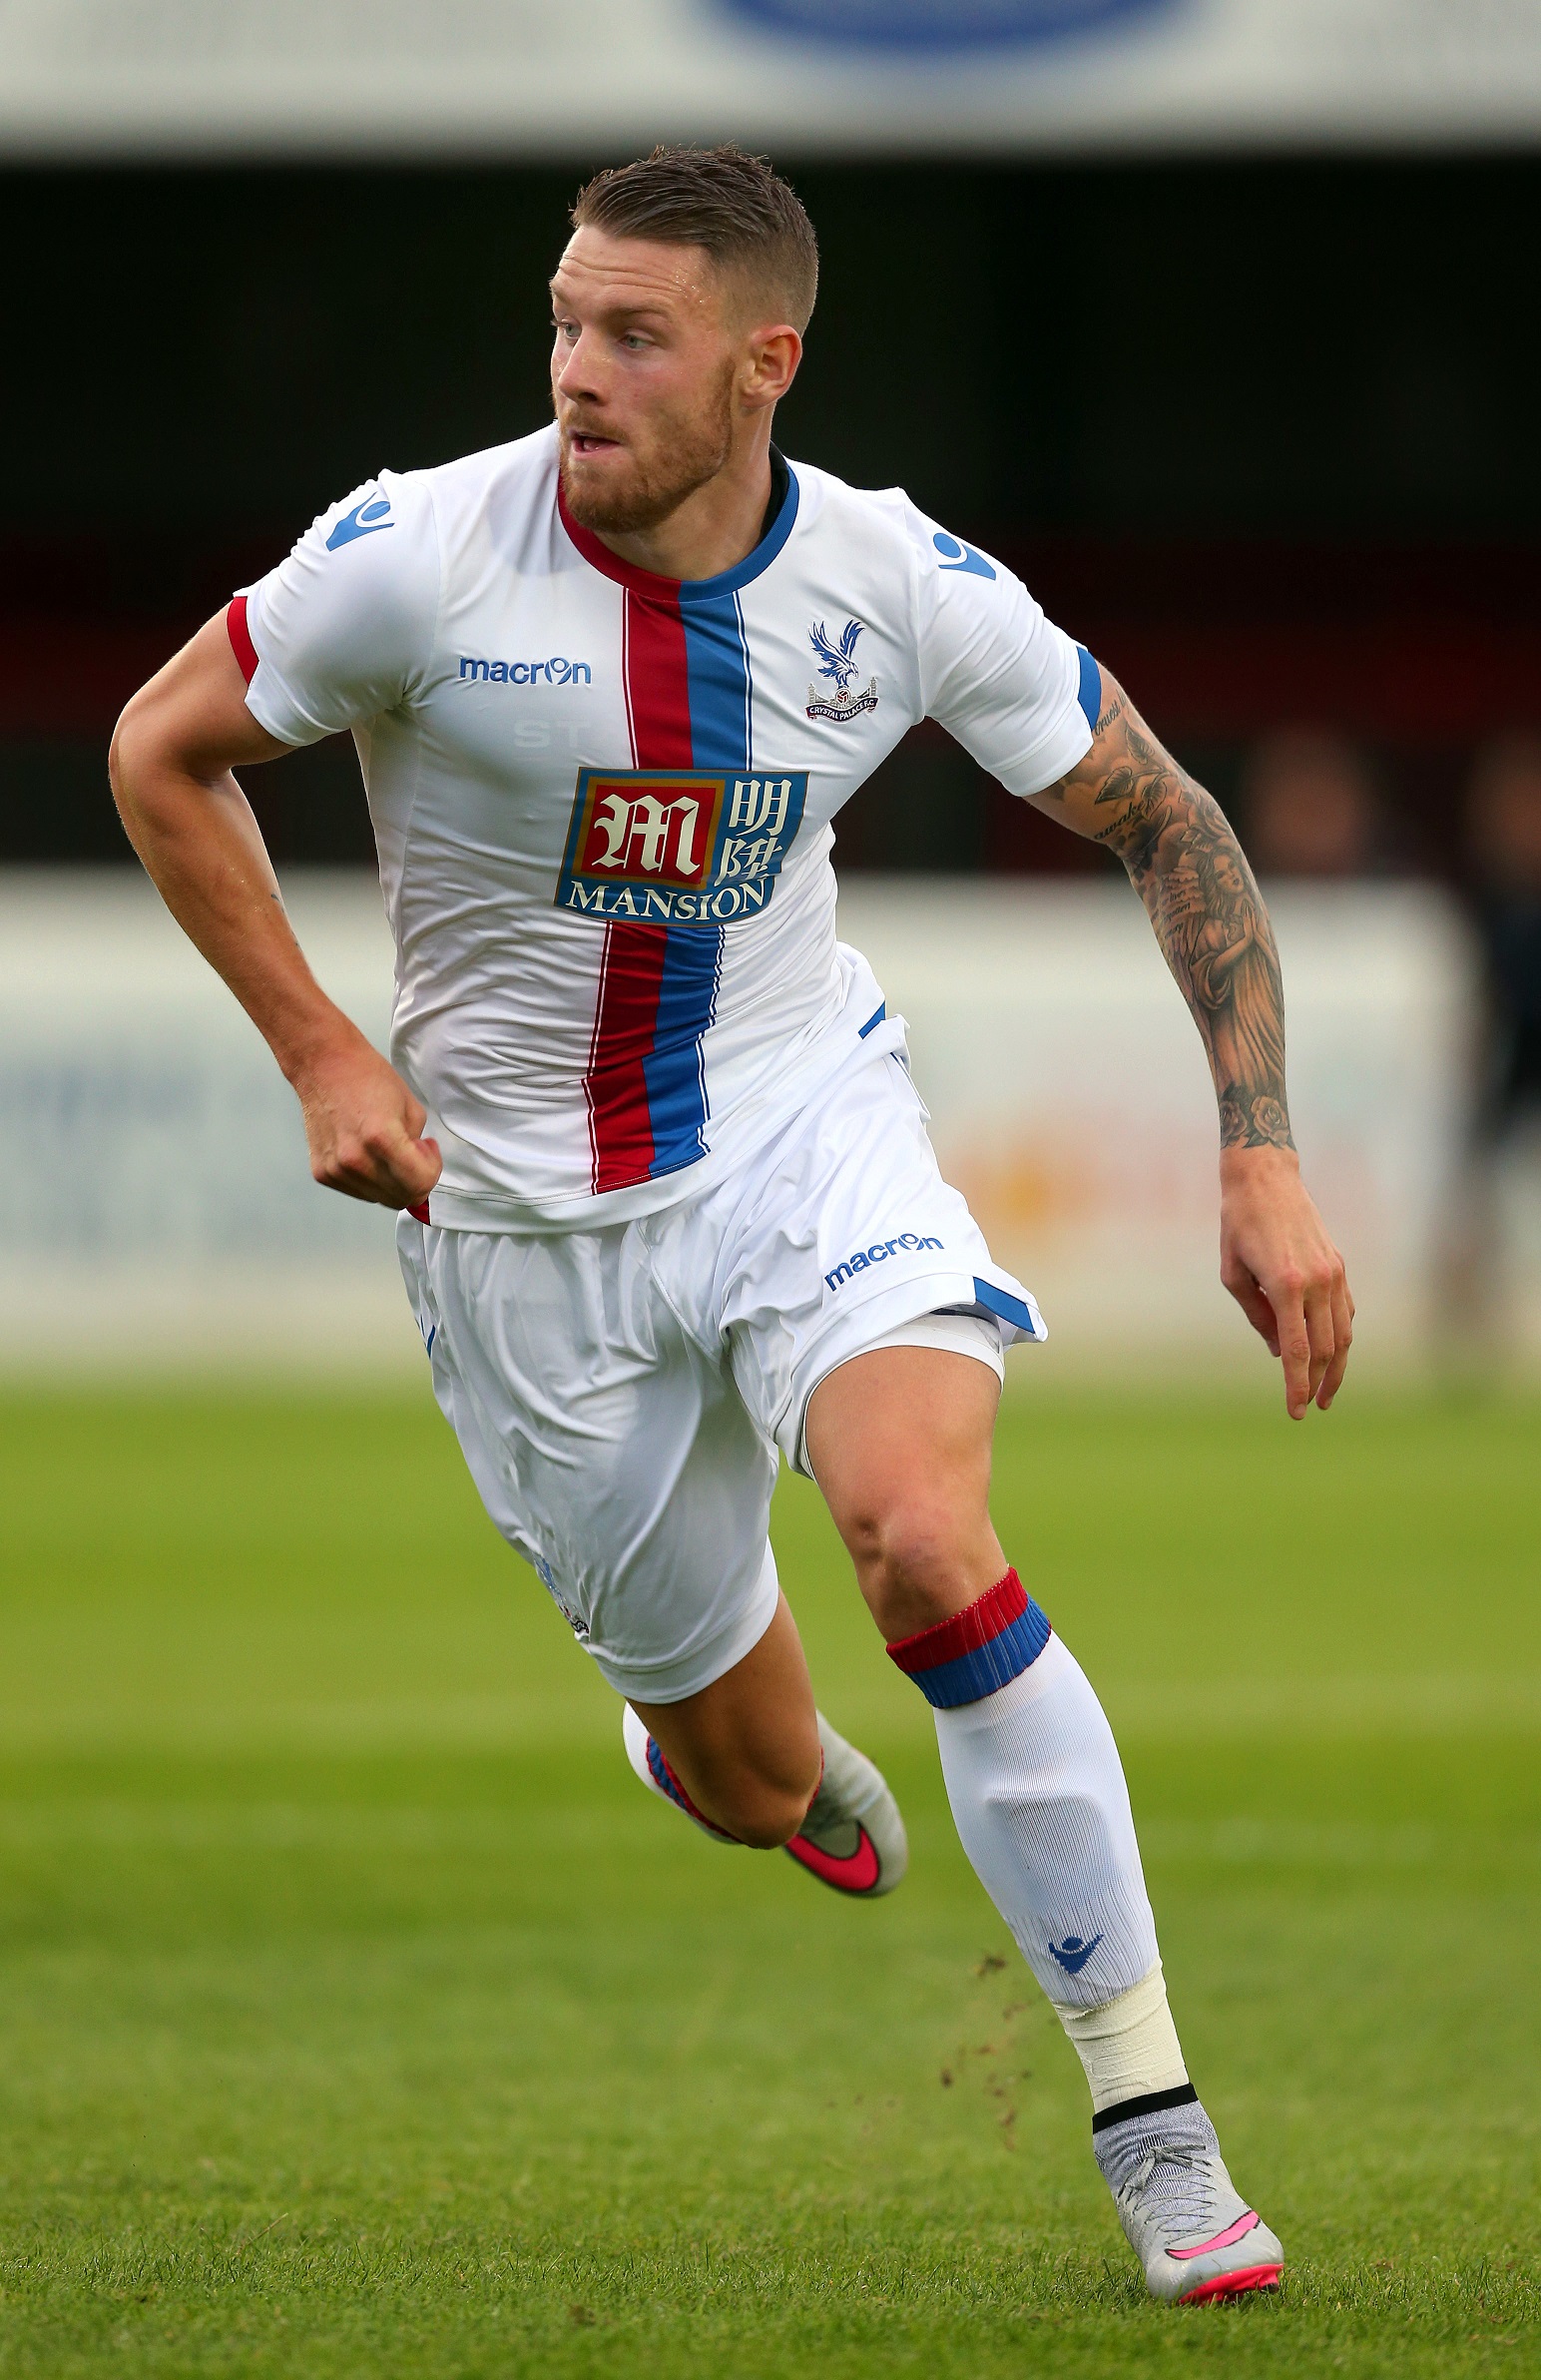 Football - Dagenham & Redbridge v Crystal Palace - Pre Season Friendly - Victoria Road - 3/8/15 Crystal Palace's Connor Wickham in action: Action Images / Matthew Childs Livepic